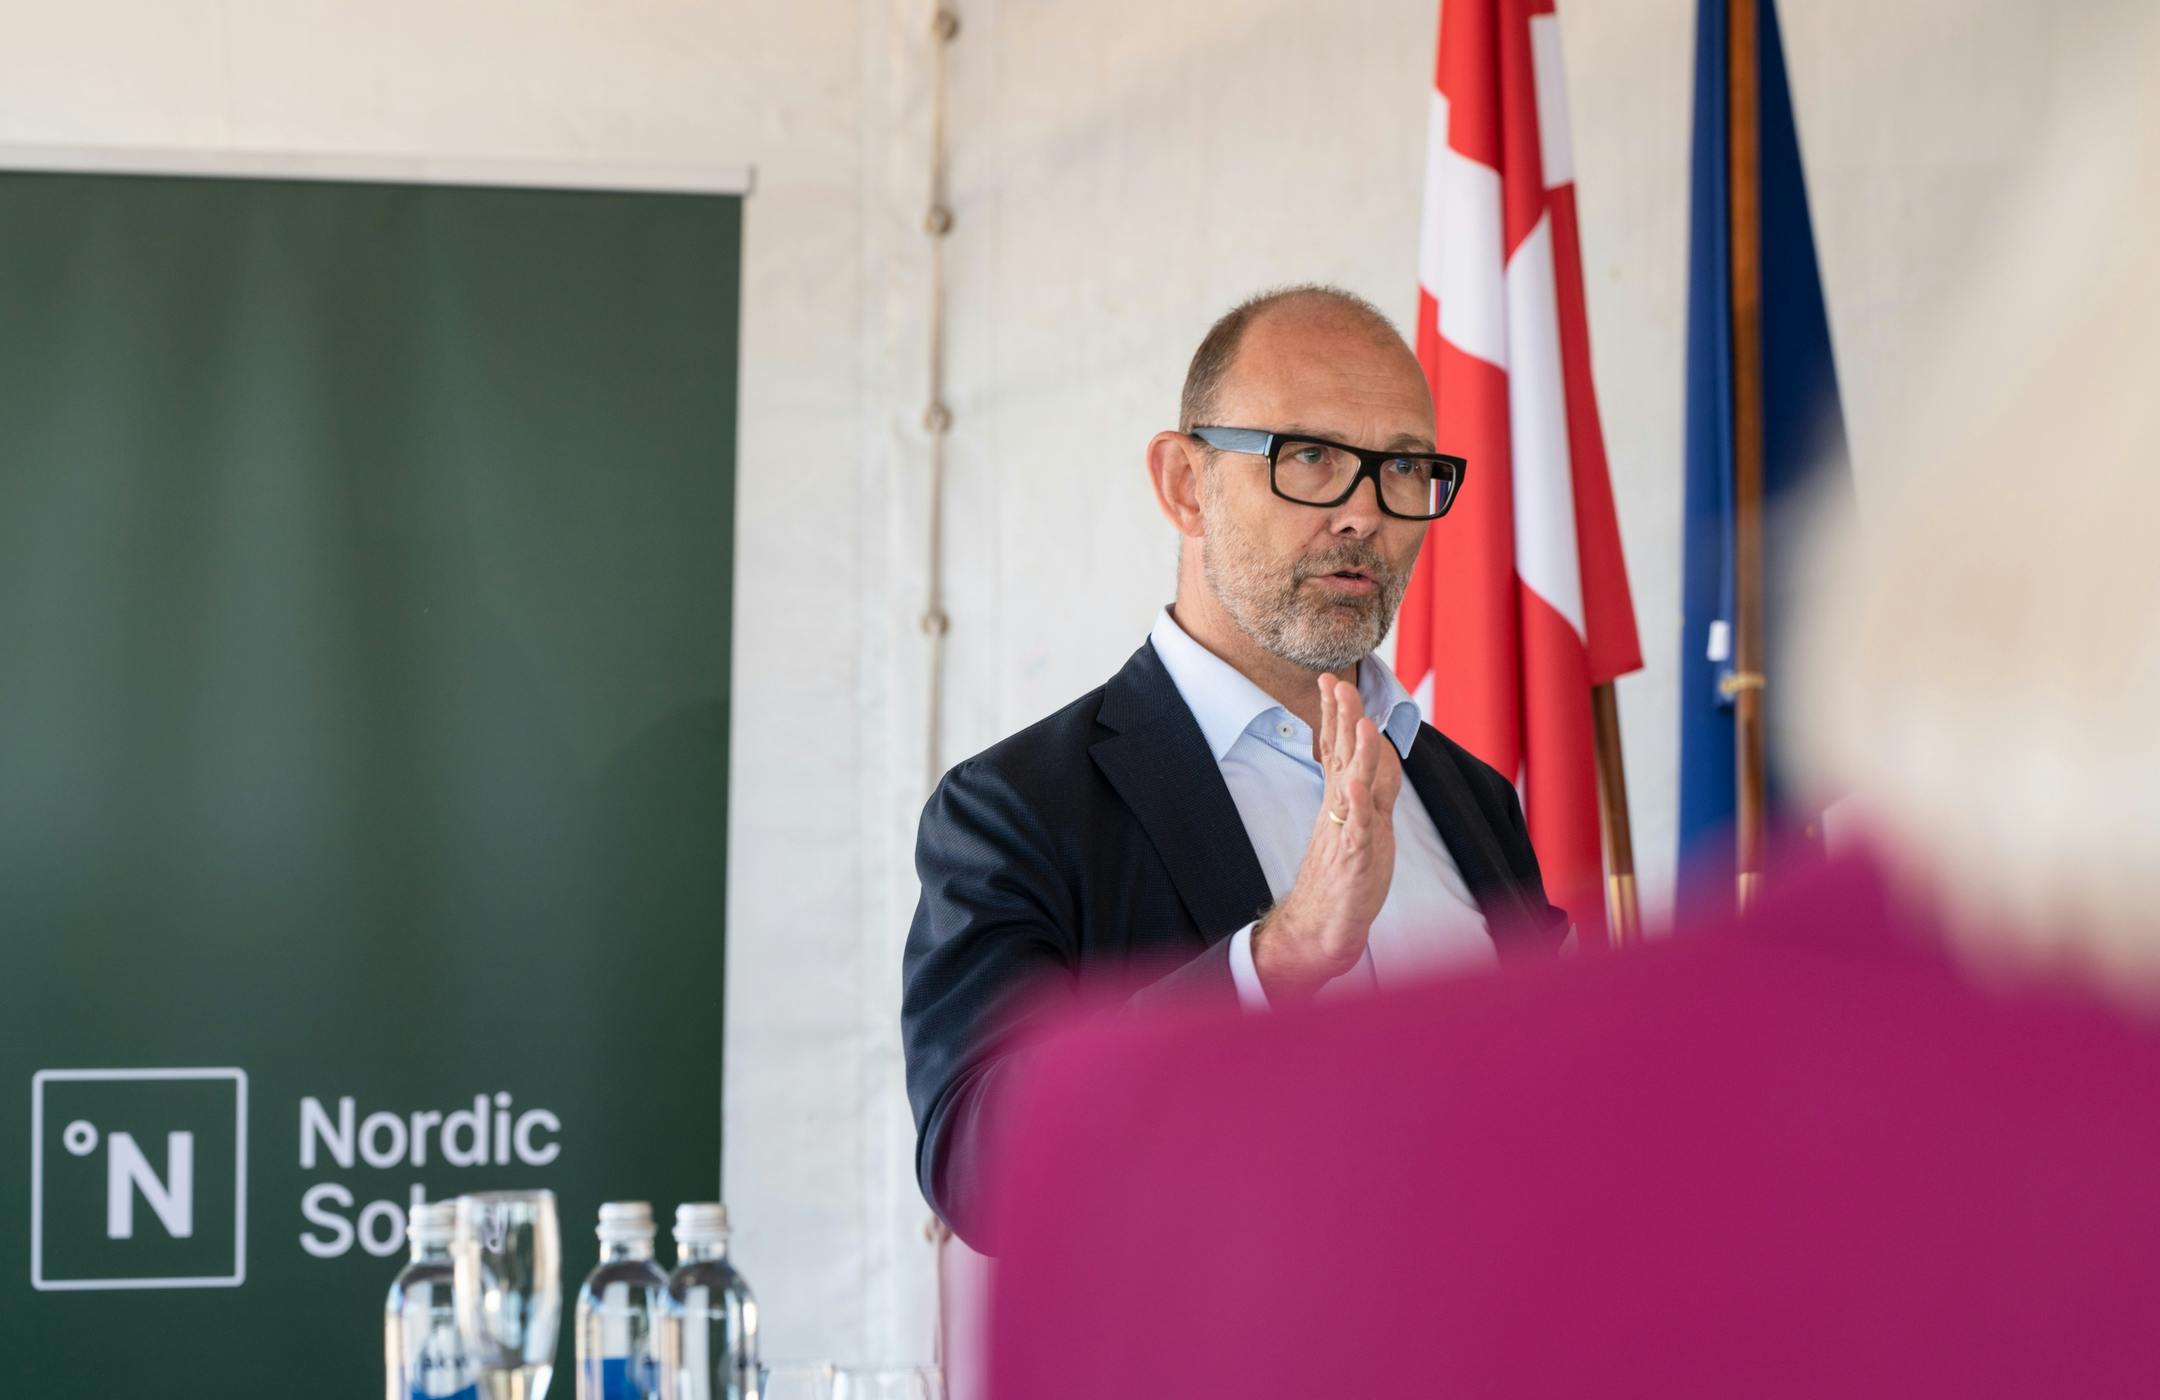 Nordic Solar CEO during speech at Moletai opening